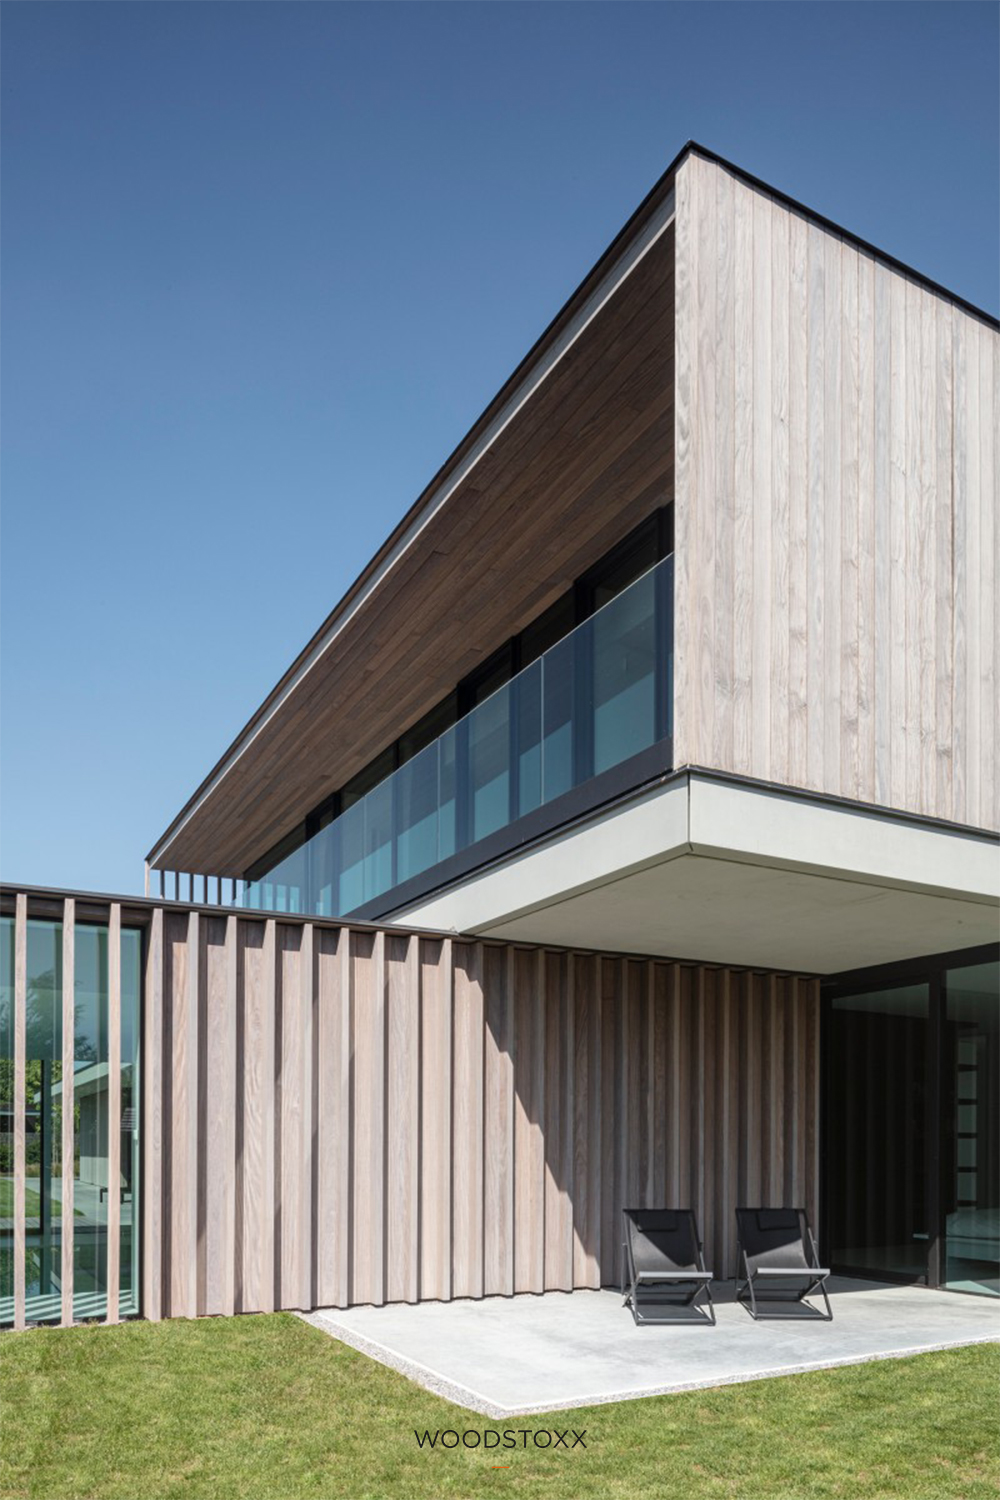 realisation facade cladding in afrormosia wood planchettes and beams